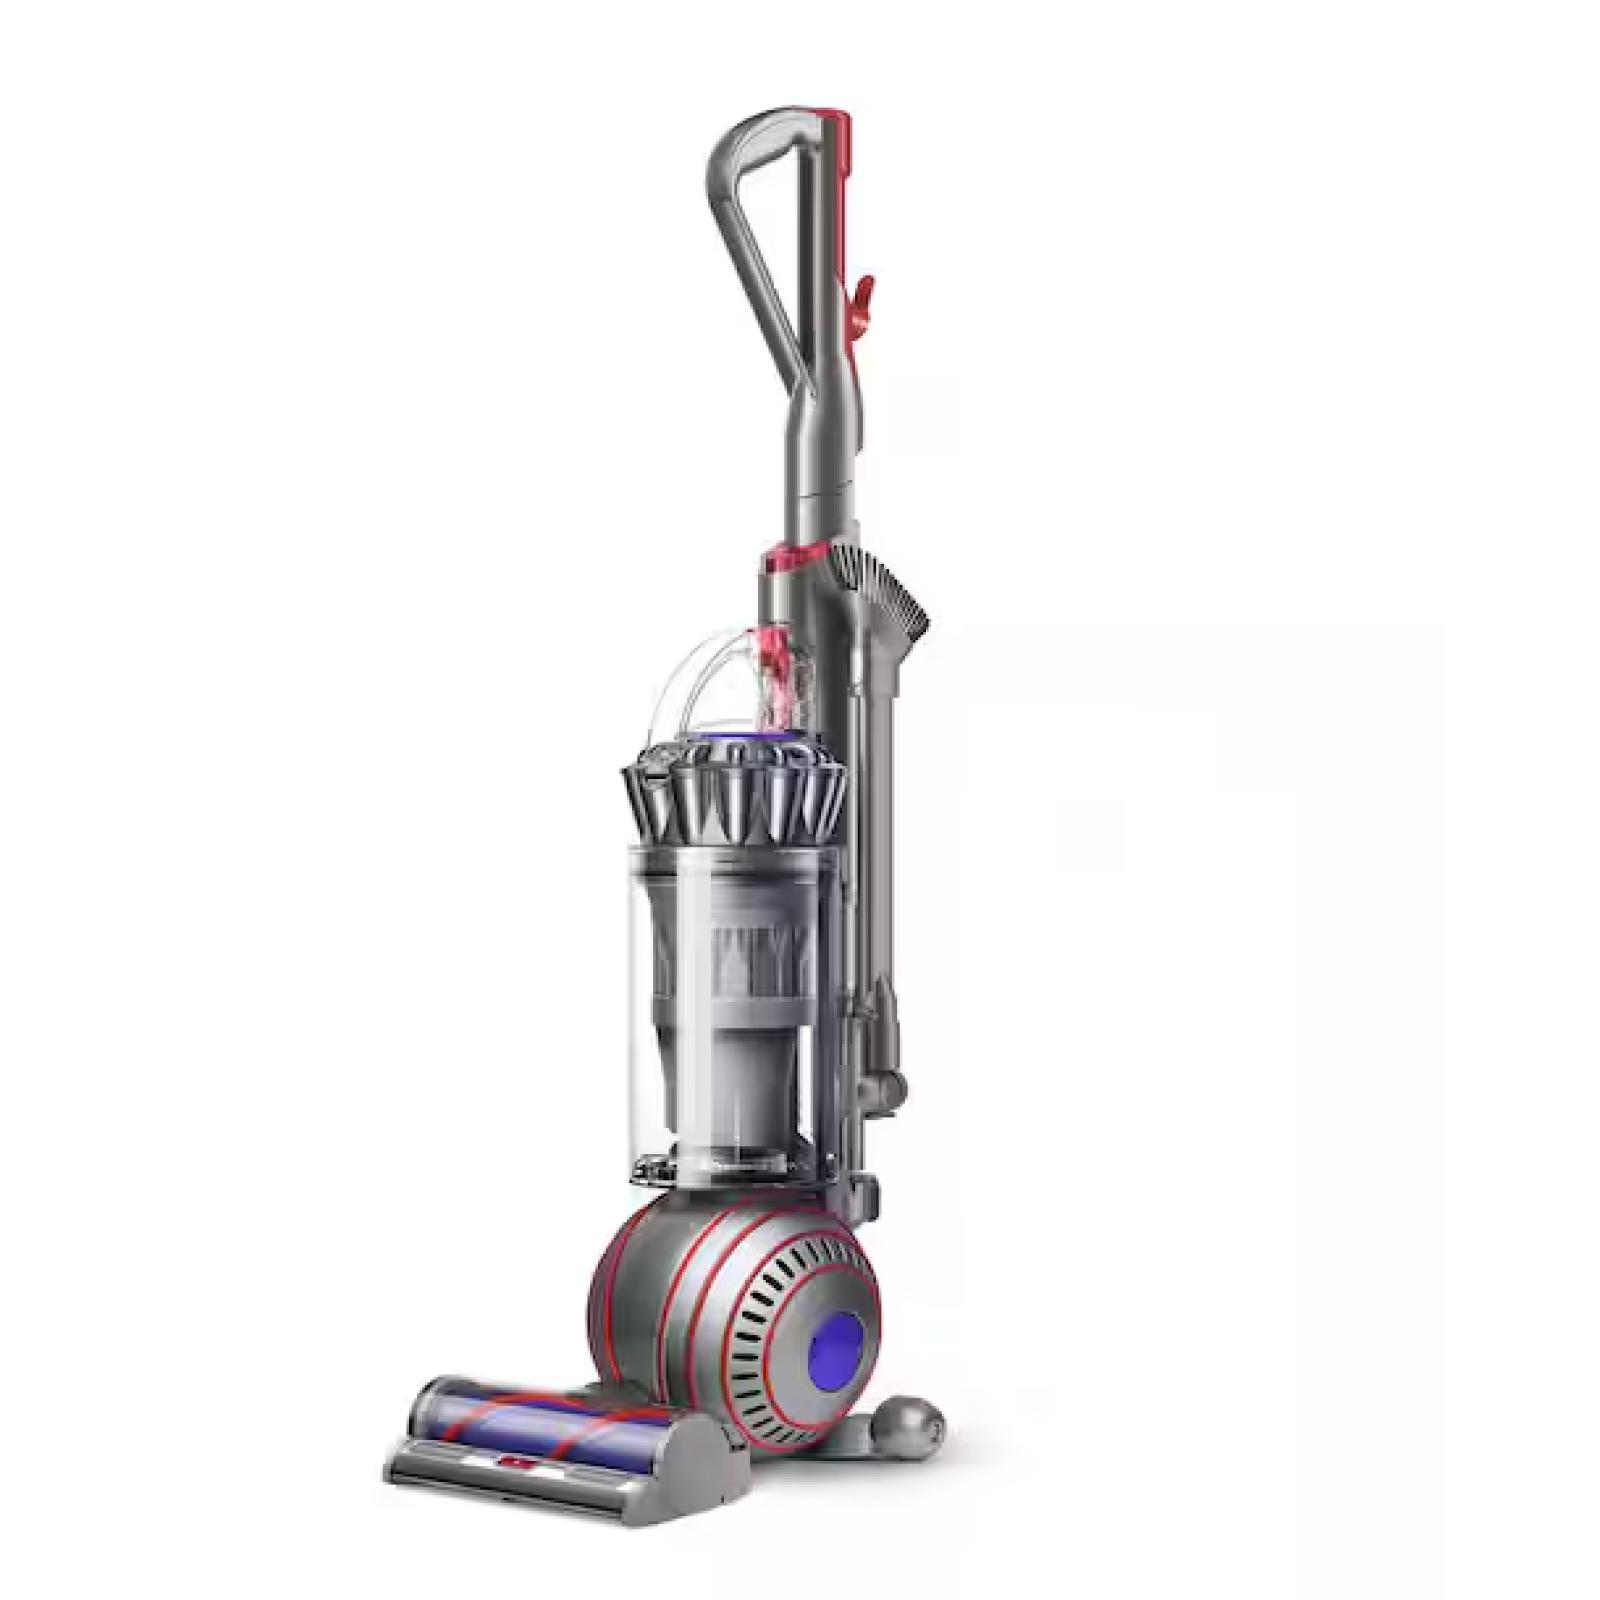 NEW! - Dyson Ball Animal 3 Upright Vacuum Cleaner